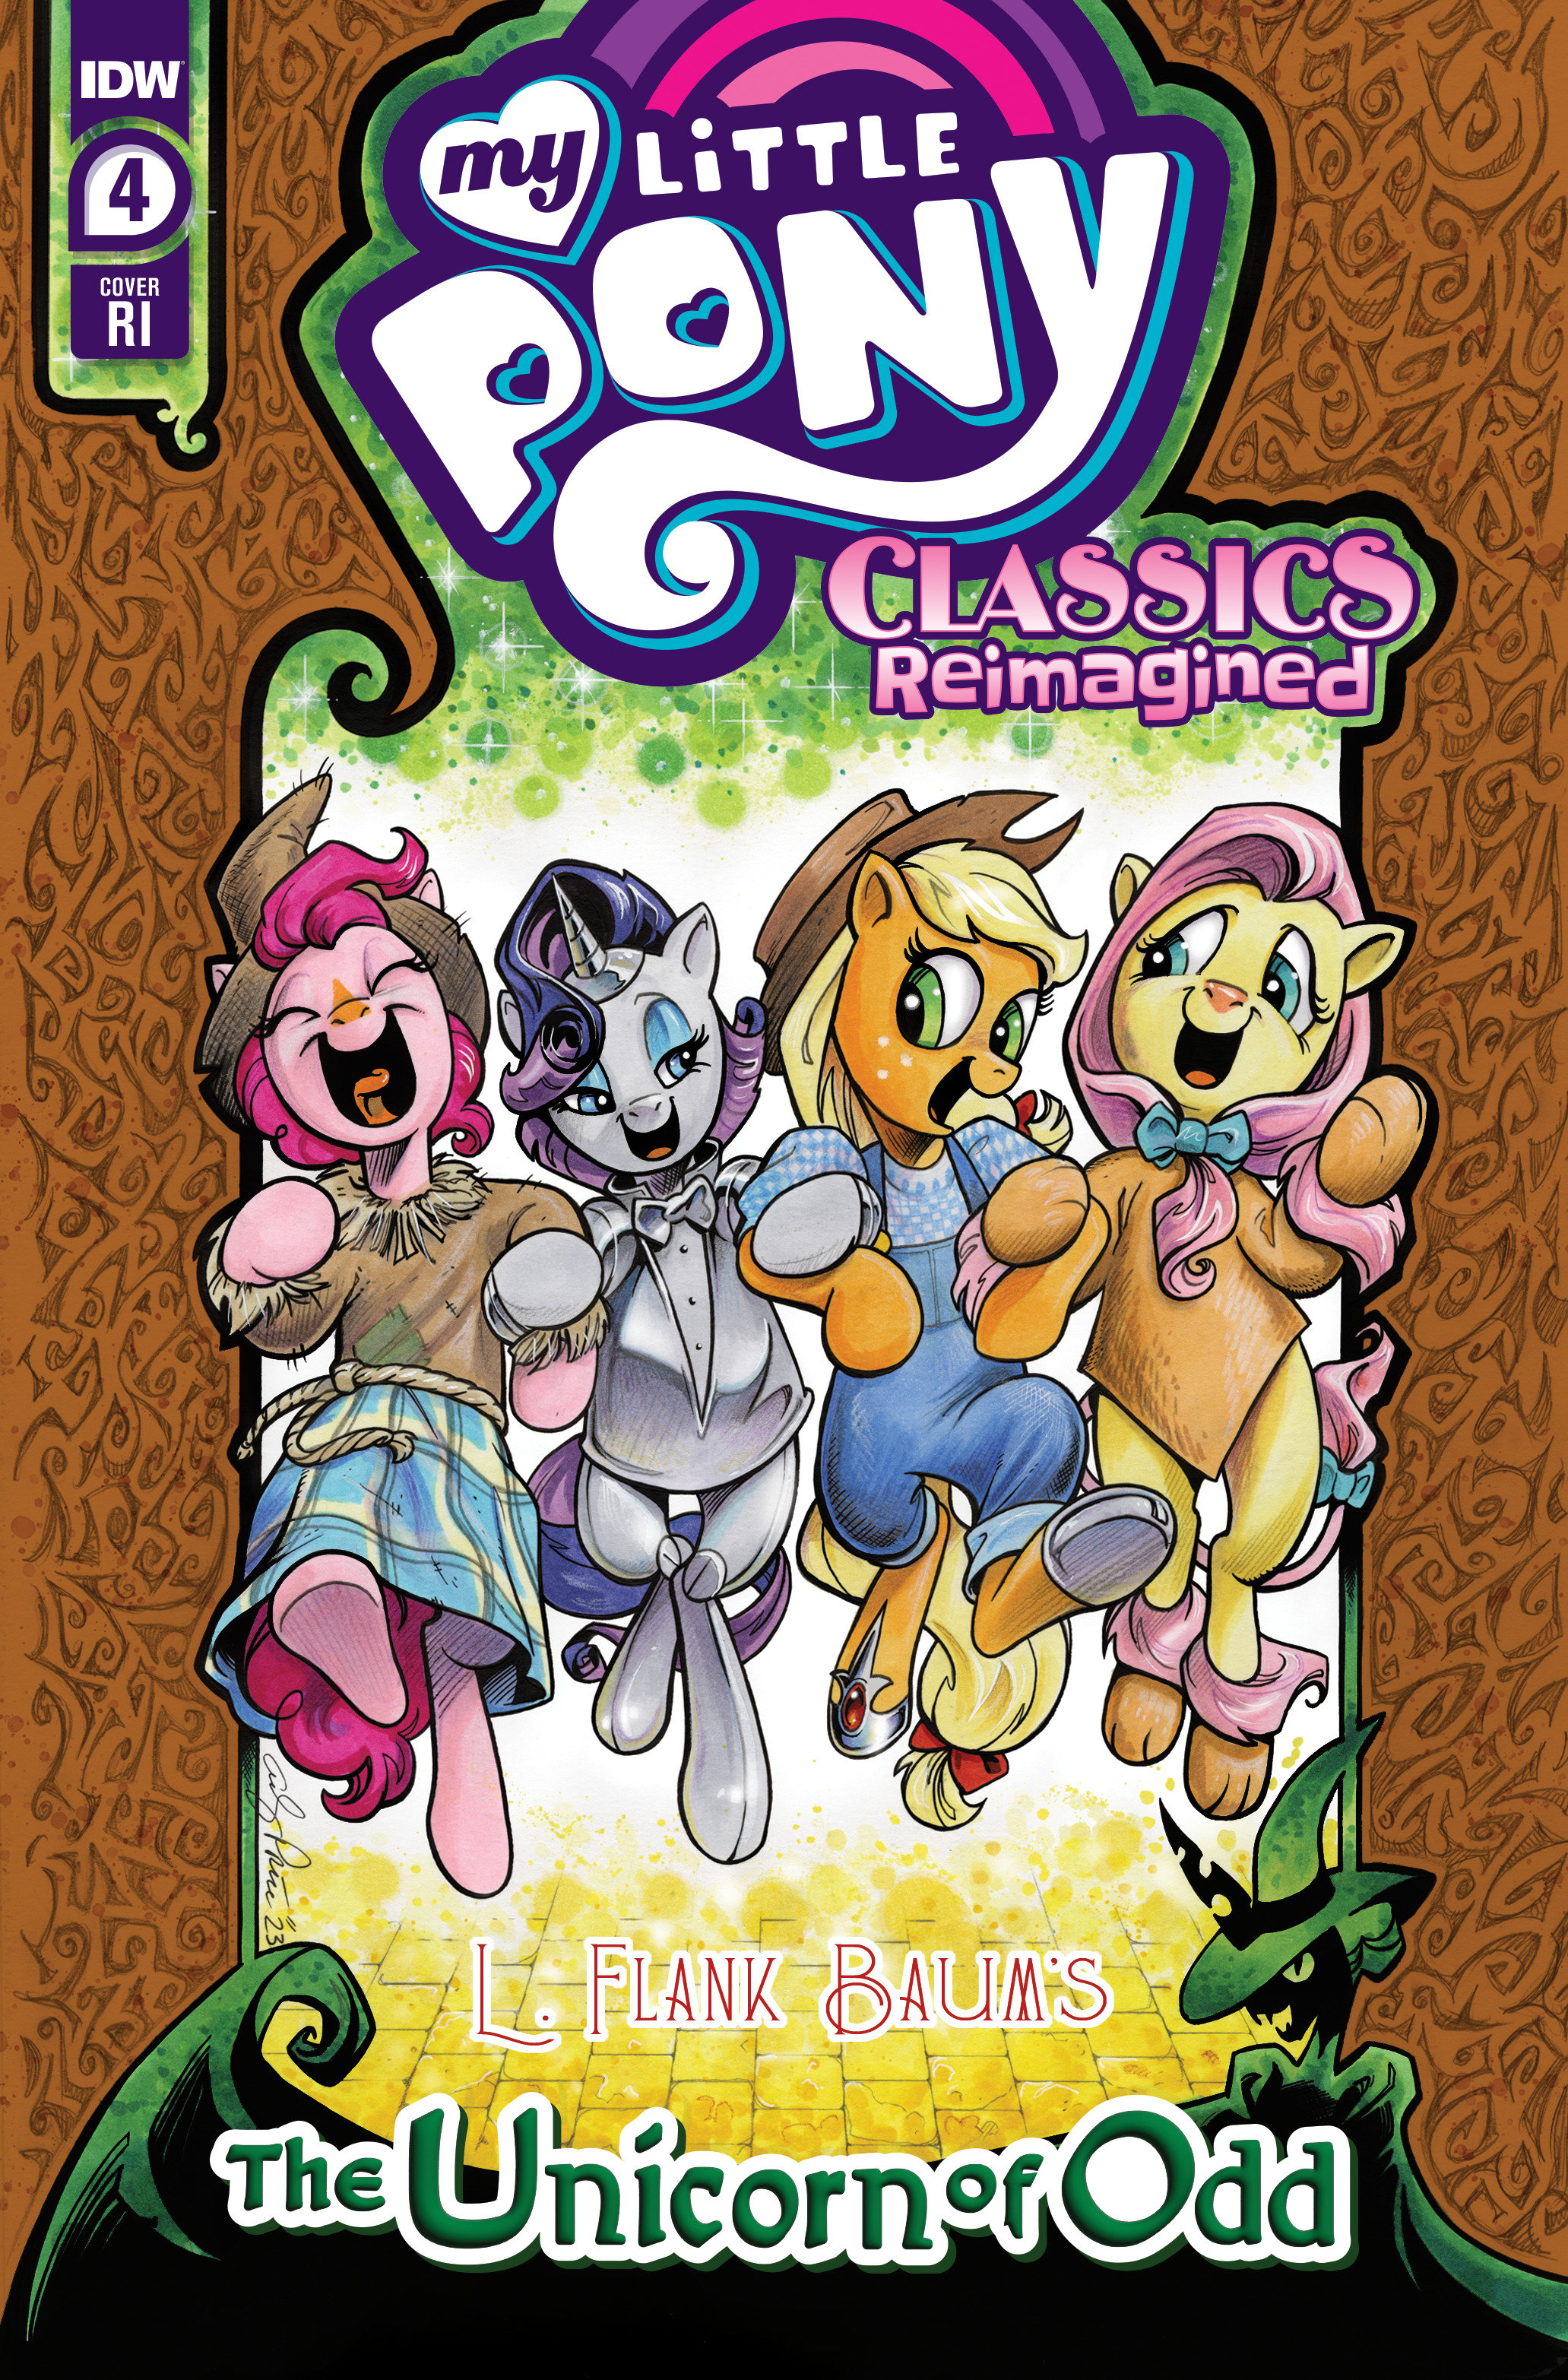 My Little Pony: Classics Reimagined--The Unicorn of Odd #4 Cover Price 1 for 10 Incentive